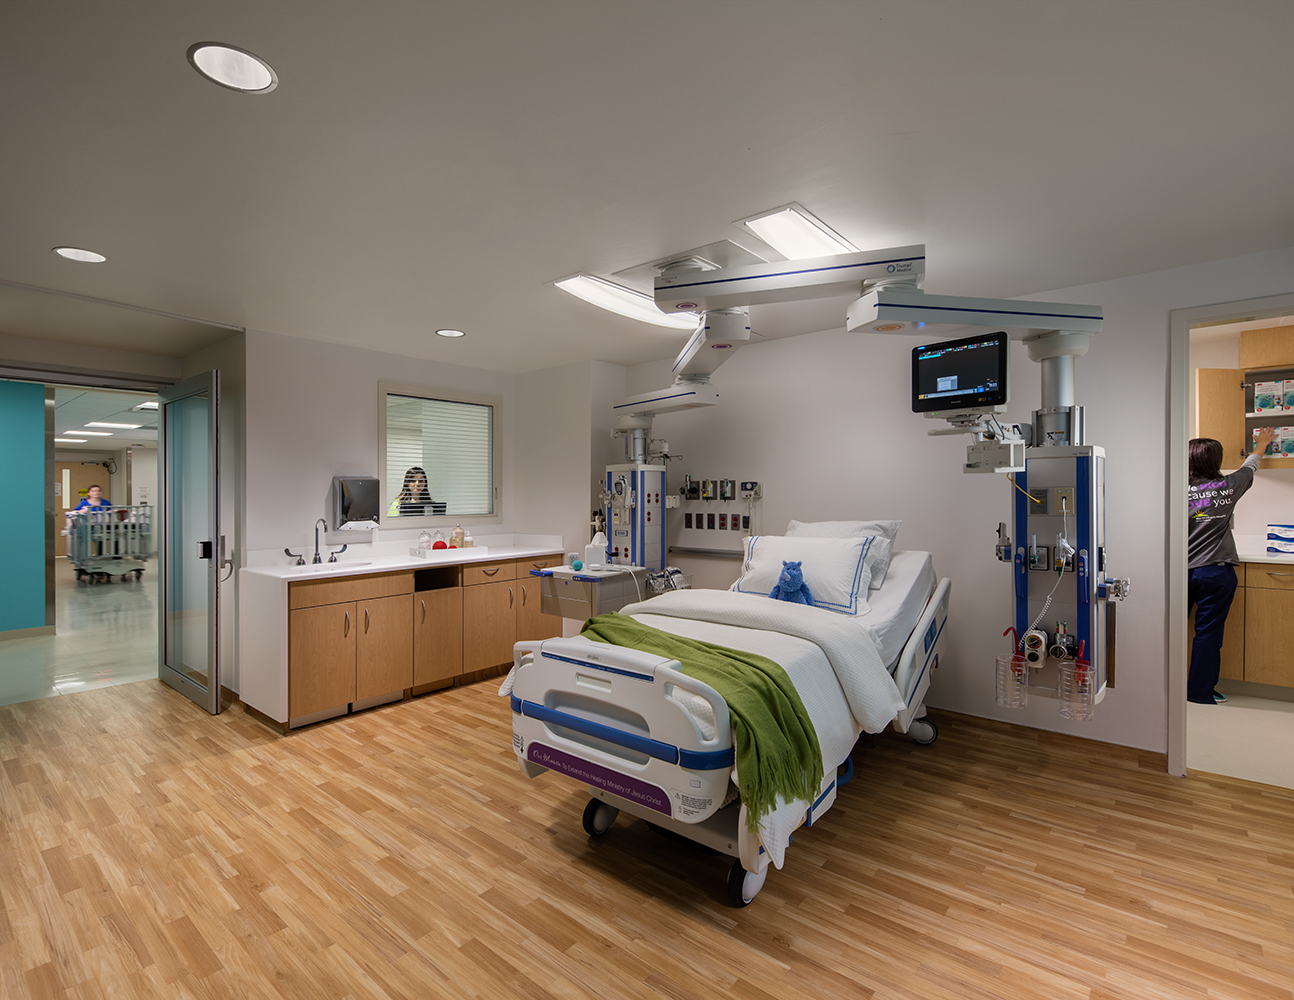 Unity tandem overbed luminaires allow for attractive patient room lighting without obstructing medical equipment.